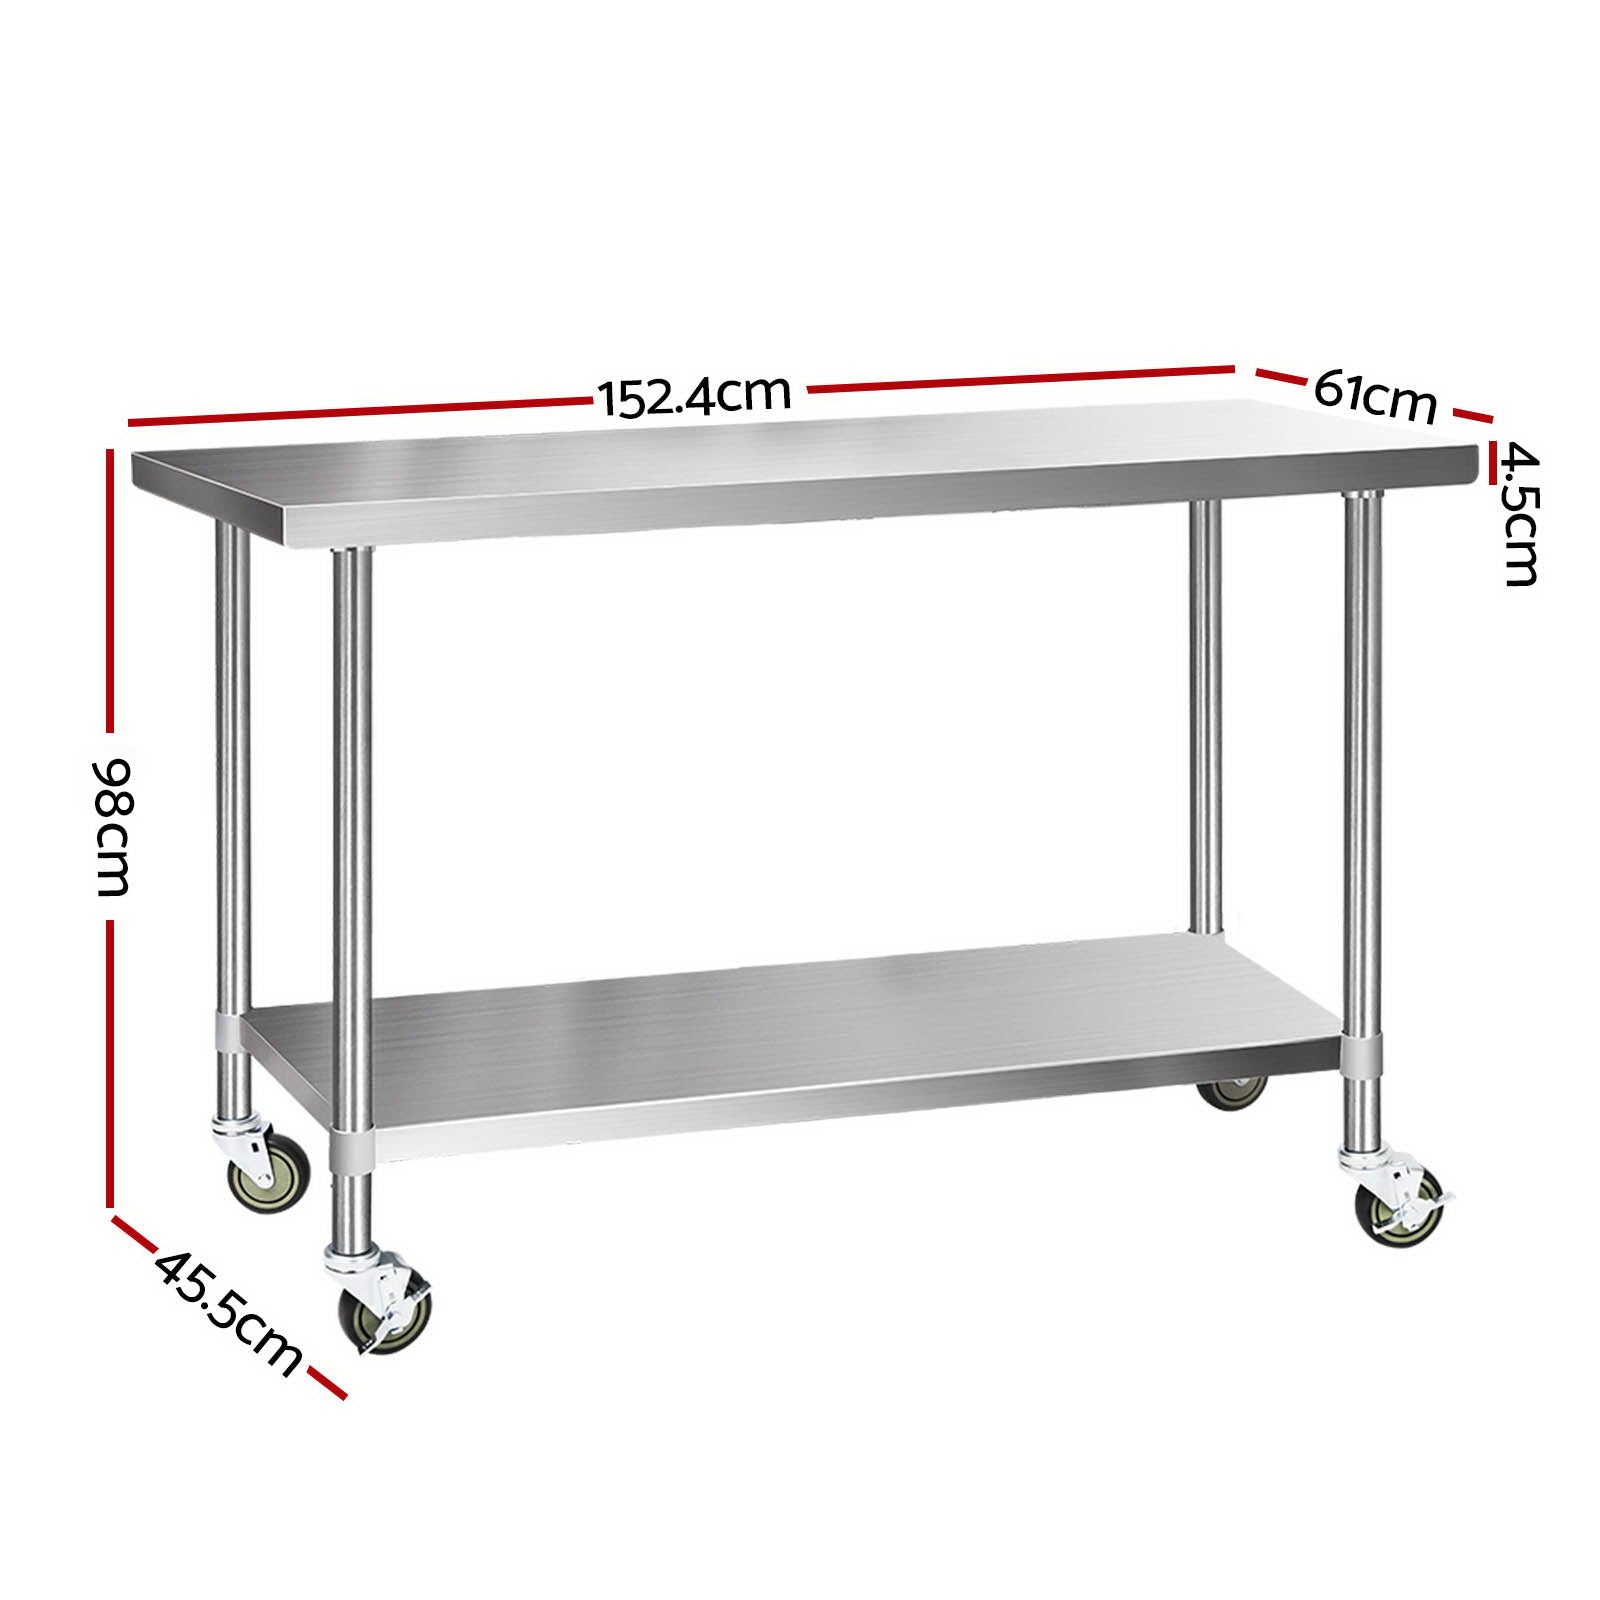 430 Stainless Steel Kitchen Benches Work Bench Food Prep Table with Wheels 1524MM x 610MM